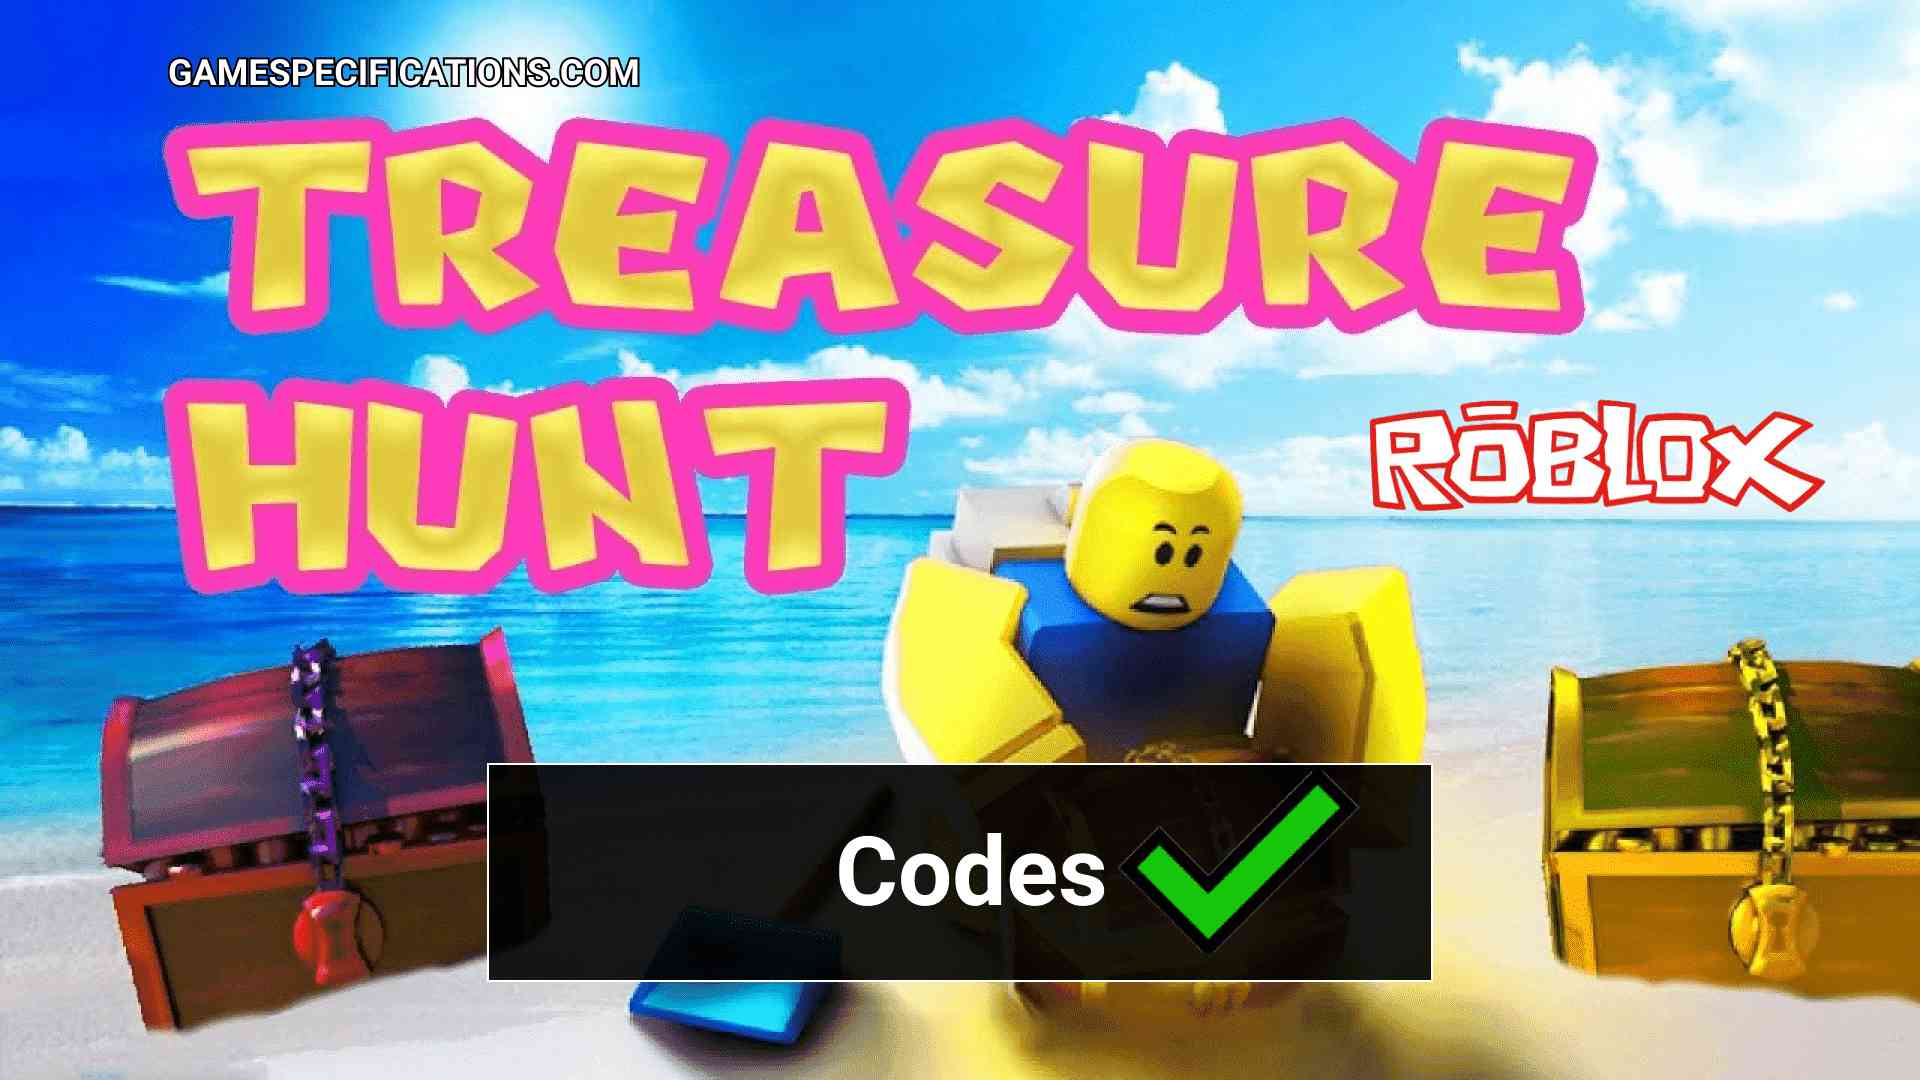 roblox-treasure-hunt-simulator-codes-july-2022-game-specifications